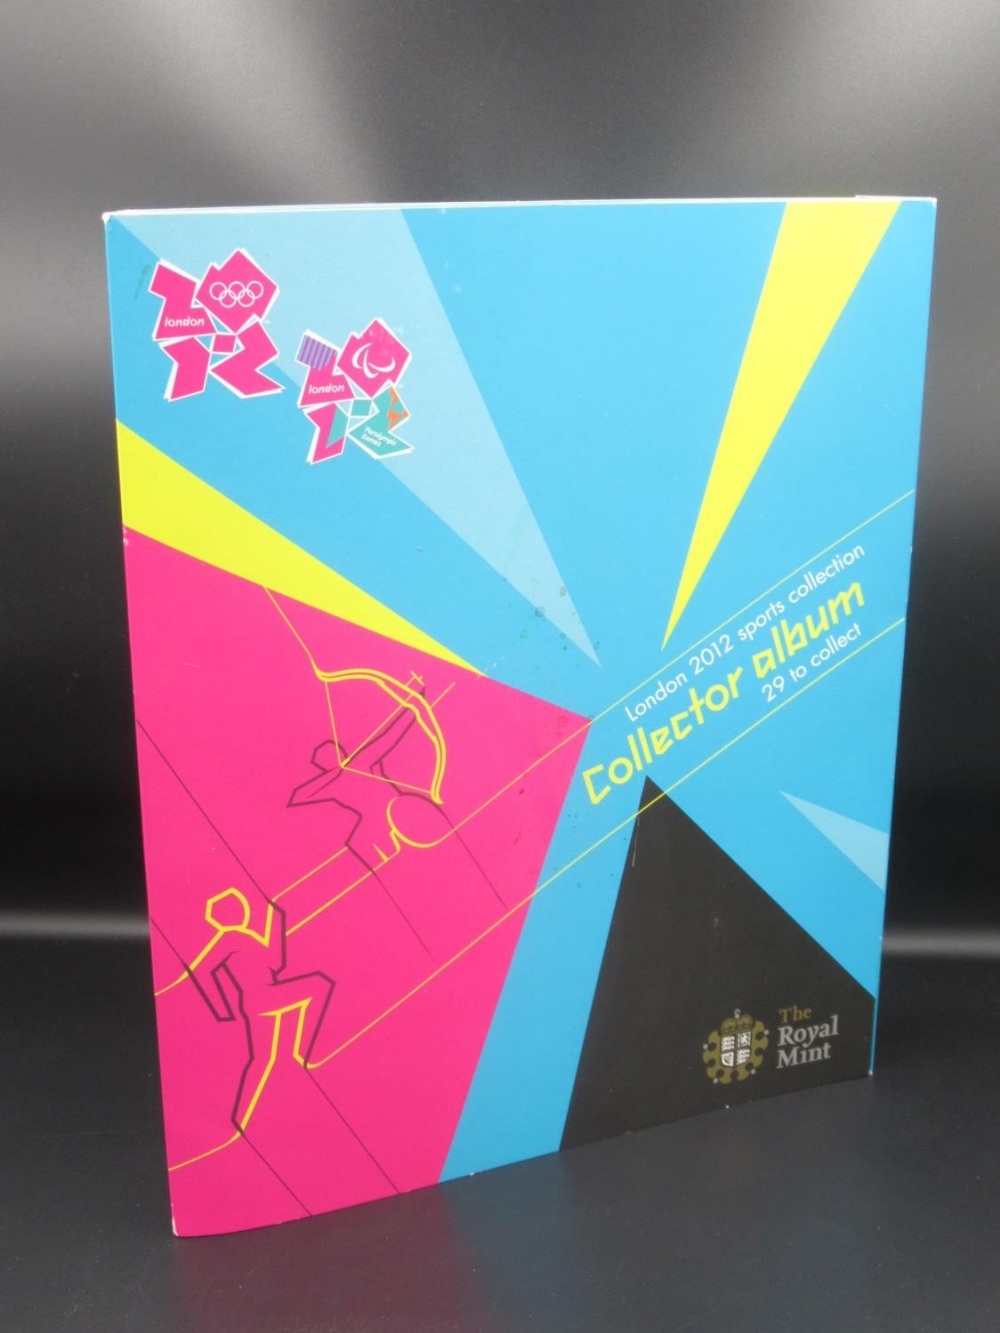 Royal Mint - London 2012 Sports Collection Collector Album, containing twenty-nine carded